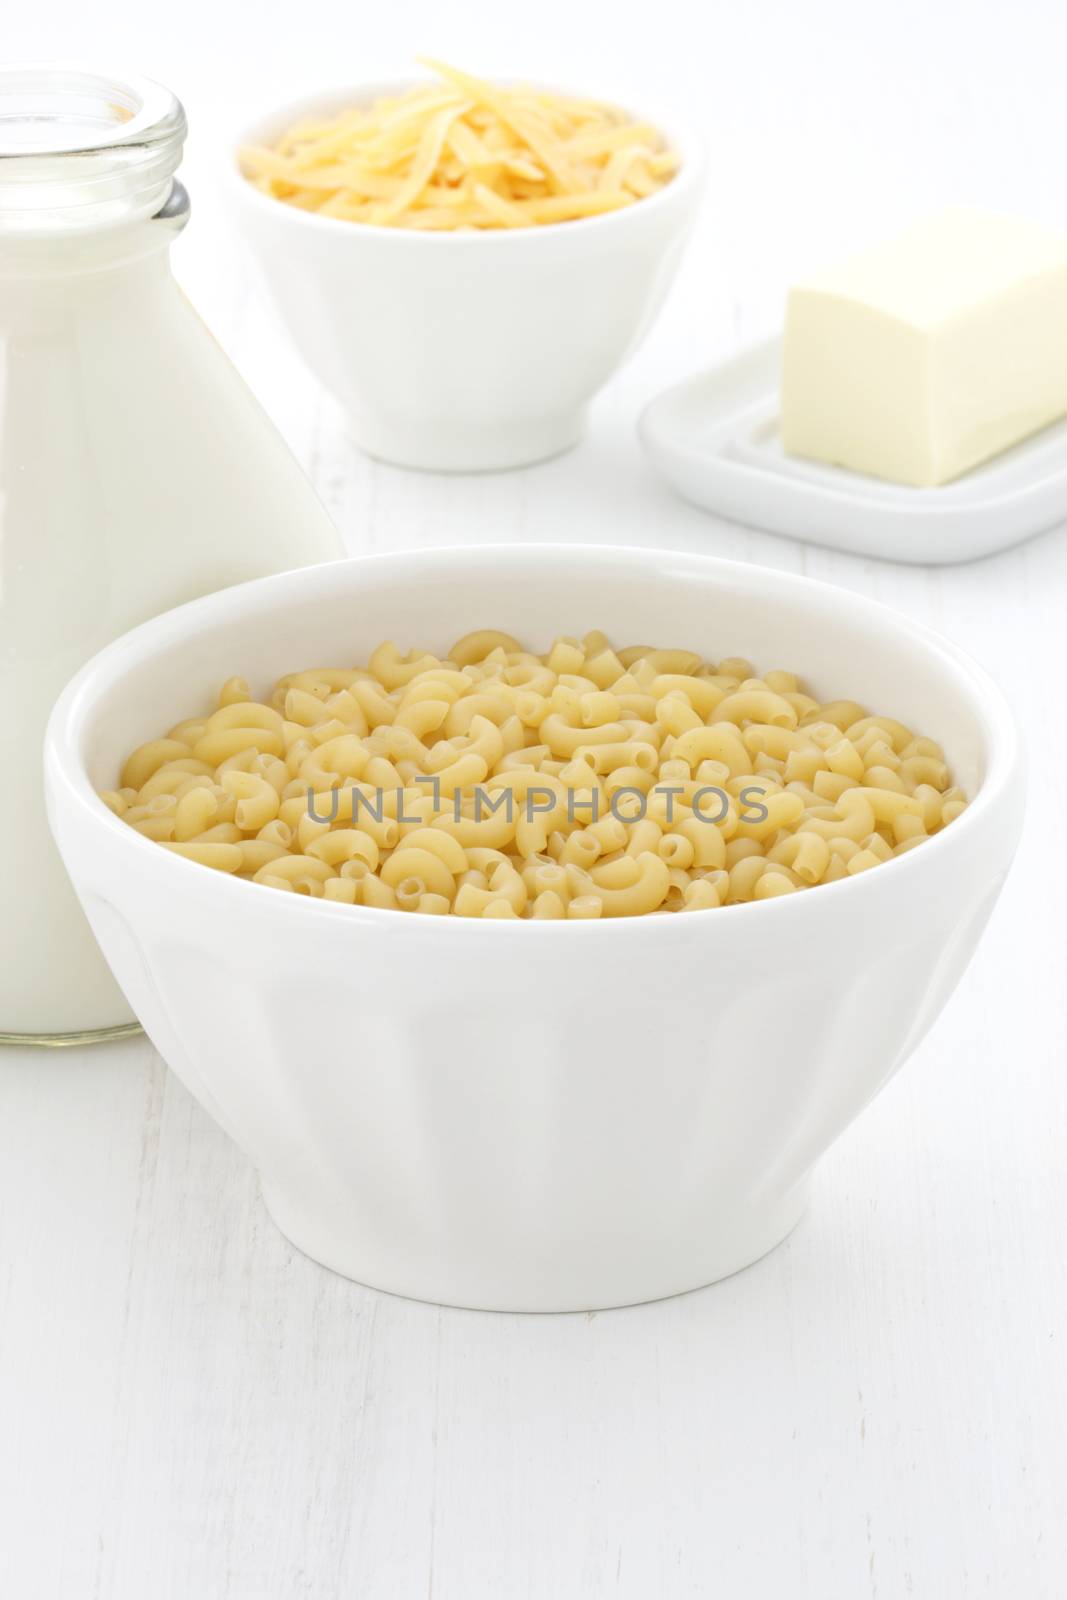 Delicious macaroni and cheese gourmet ingredients, a welcomed meal for adults and kids dinner.